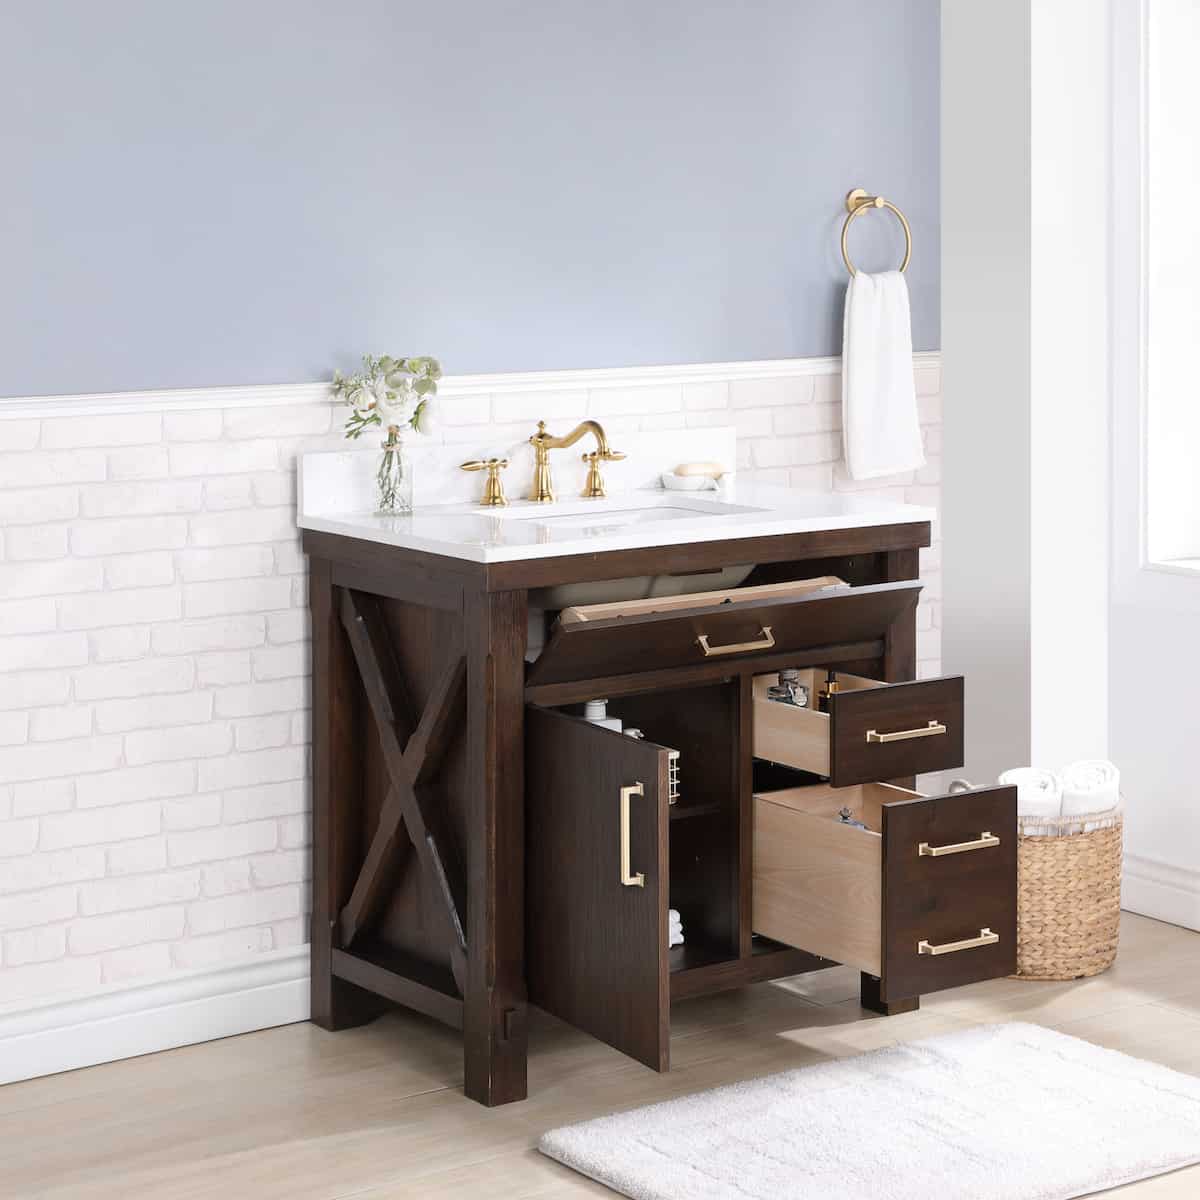 Vinnova Viella 36 Inch Freestanding Single Sink Bath Vanity in Deep Walnut Finish with White Composite Countertop Without Mirror Inside 701836-DW-WS-NM